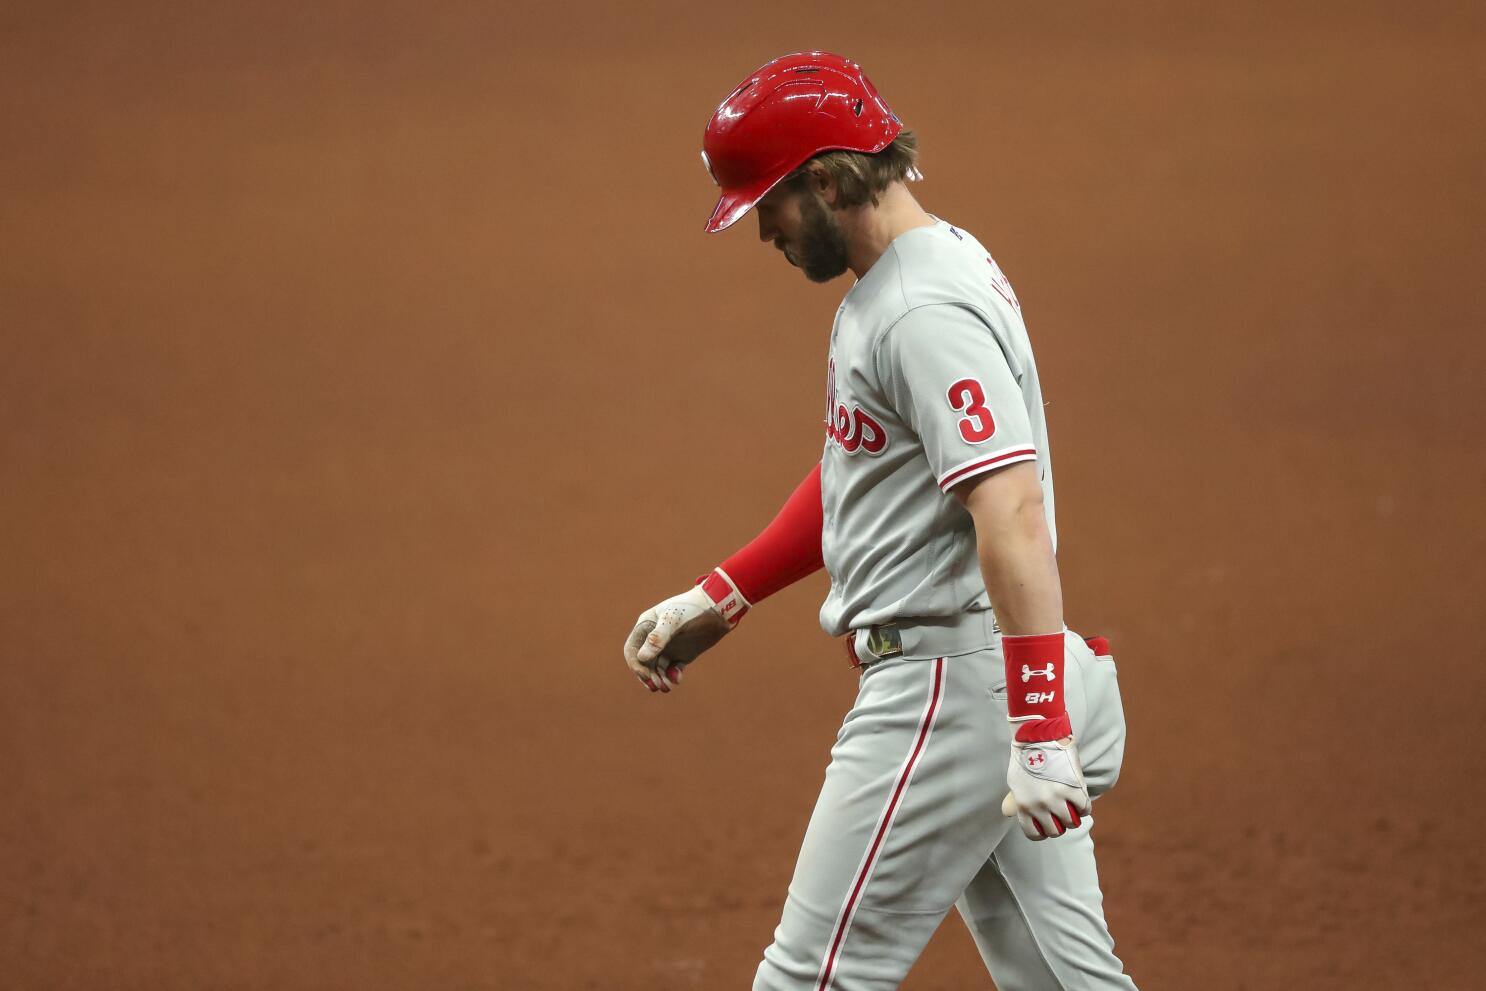 Bryce Harper and Jake Arrieta on J.T. Realmuto's contract